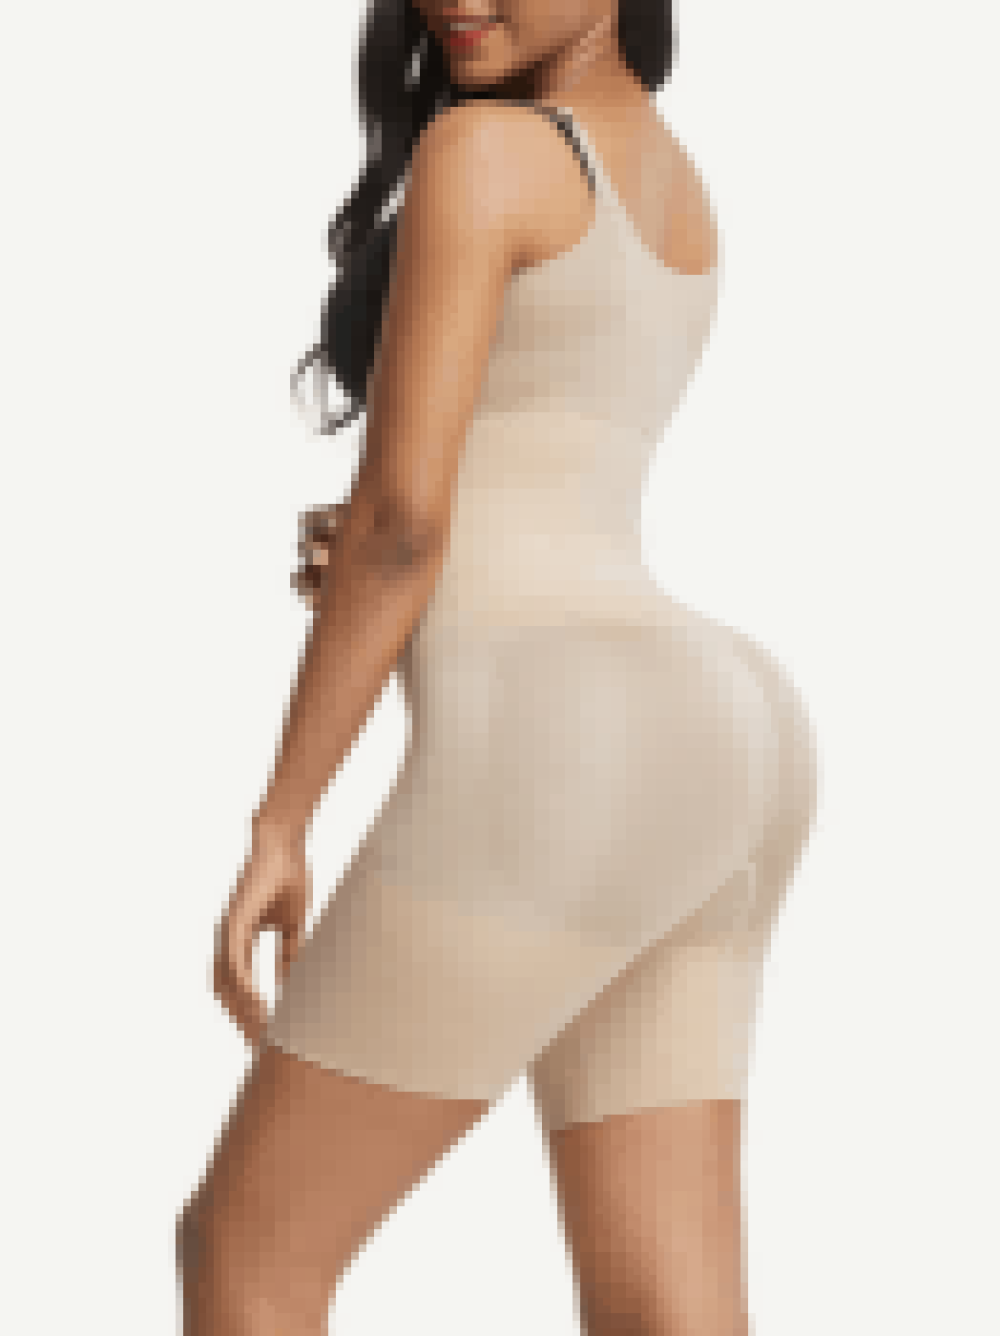 Eco-friendly Seamless Open-Bust Mid-Thigh Bodysuit